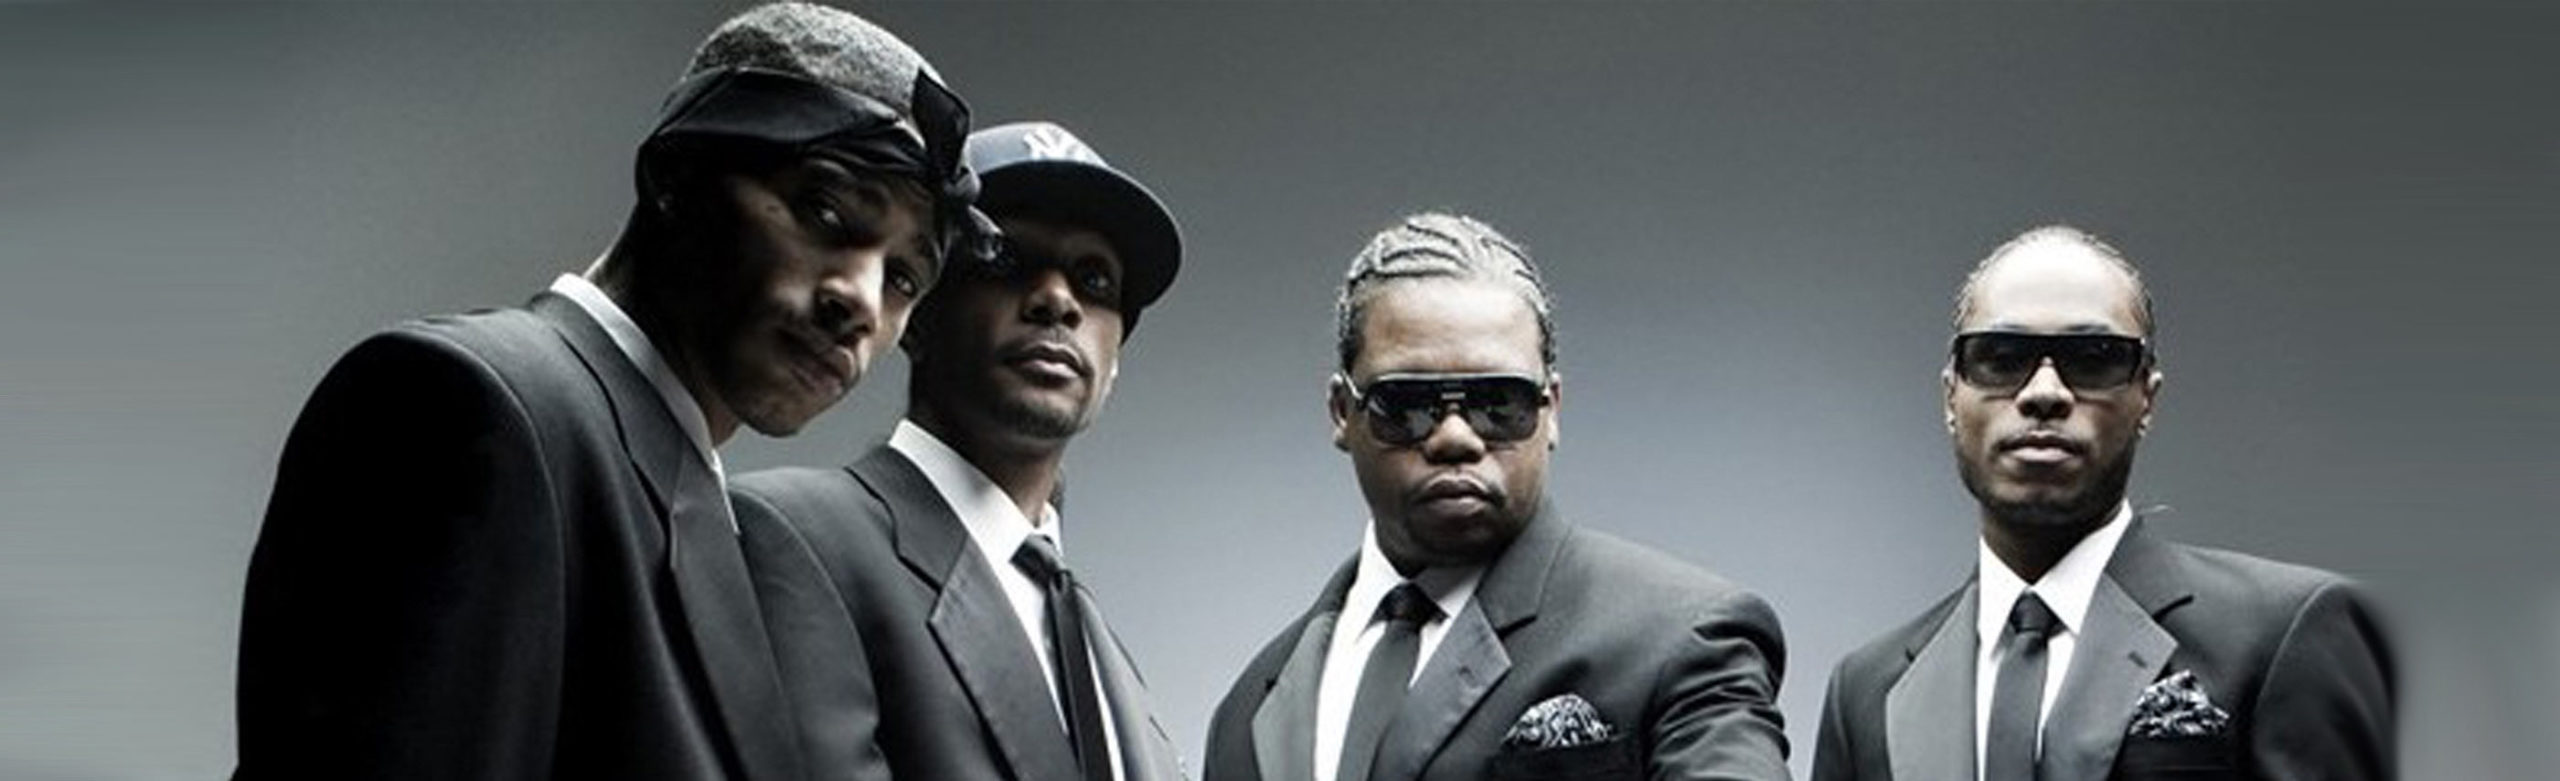 Bone Thugs N Harmony Confirm Valentines Day Concert in Missoula Image